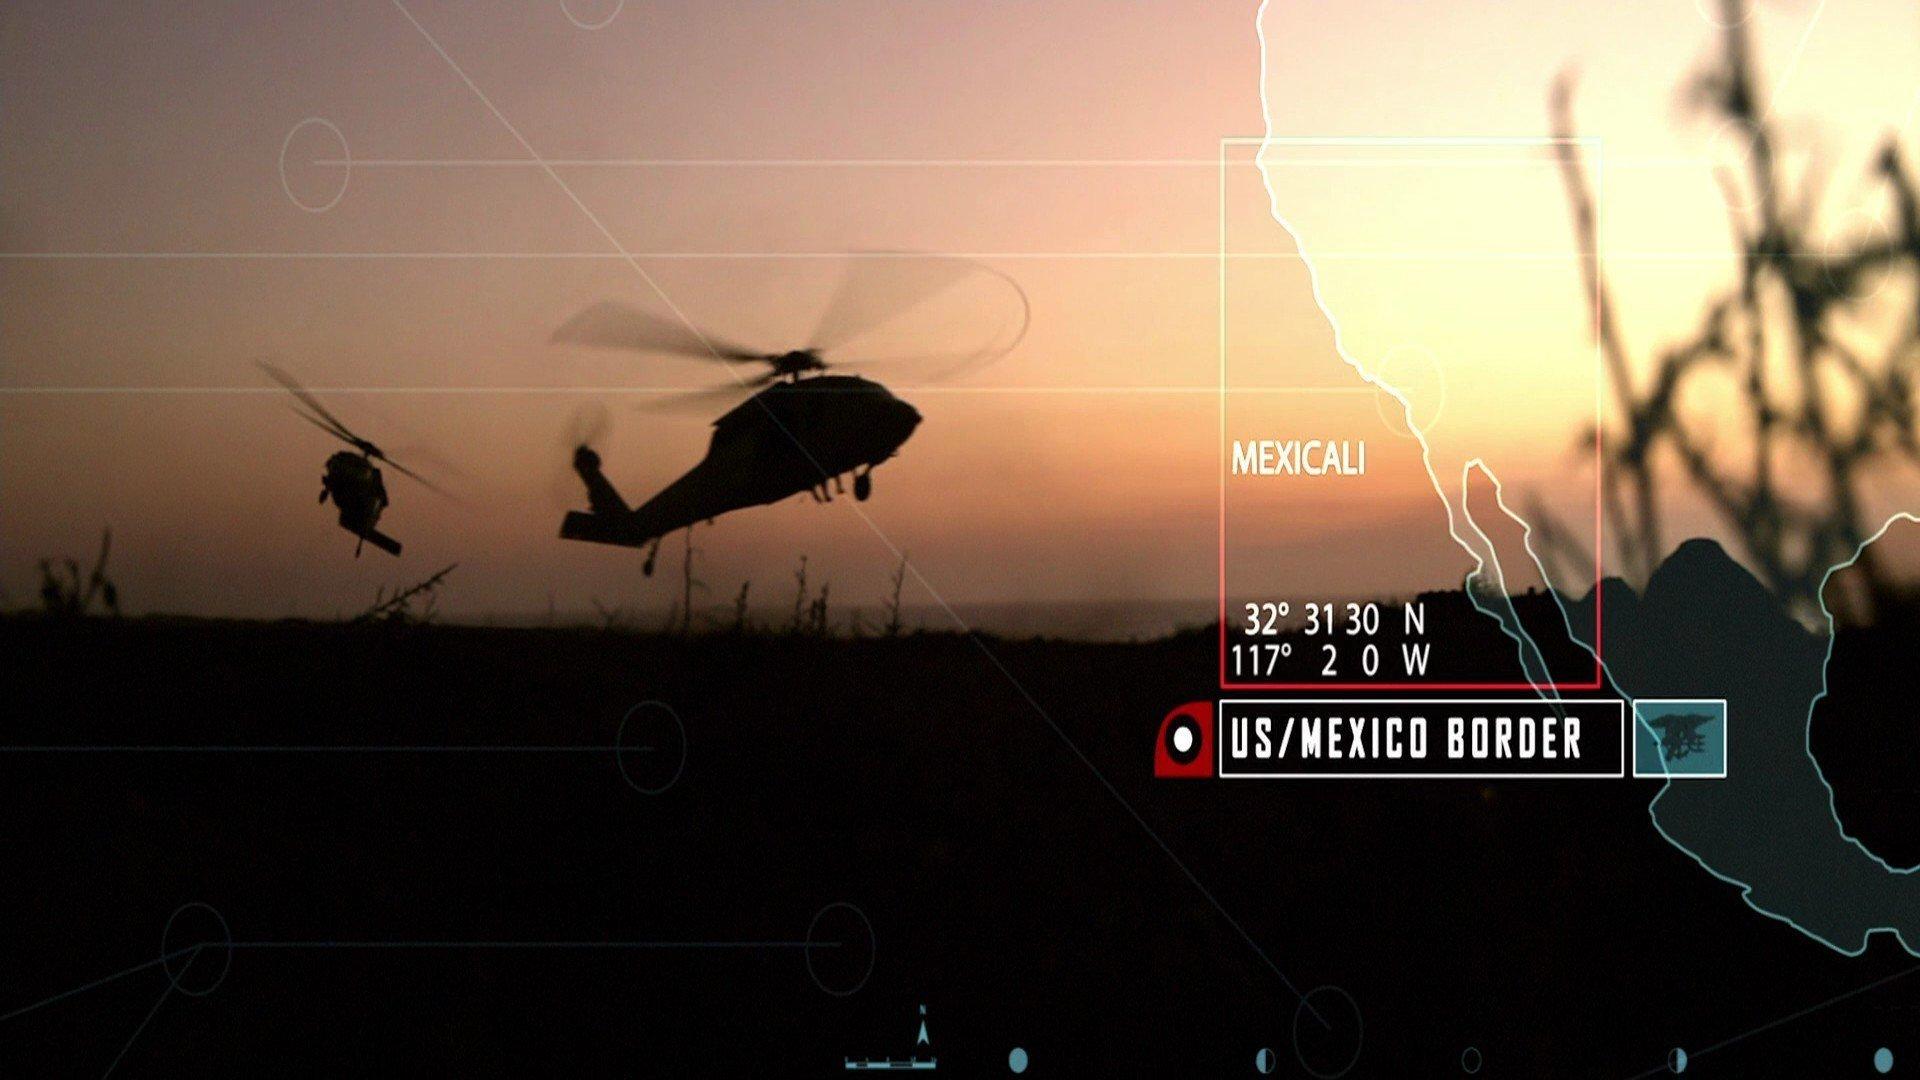 Act Of Valor HD Wallpaper. Background Imagex1080